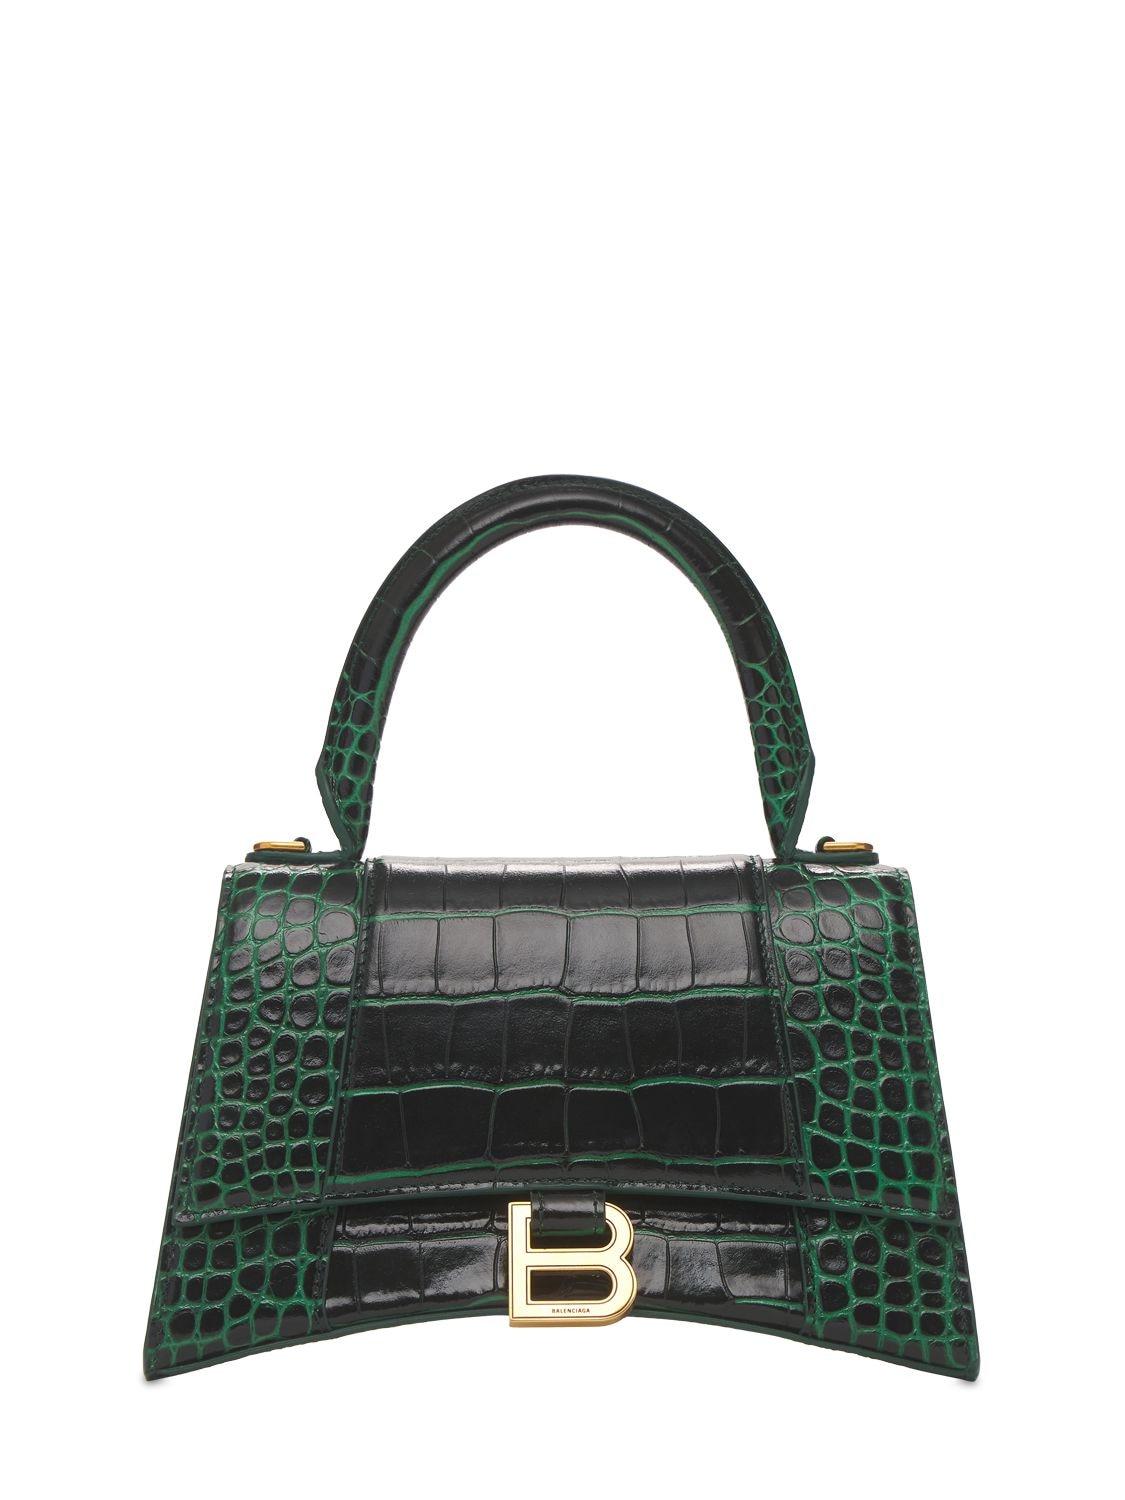 Balenciaga Hourglass Croc Embossed Leather Bag in Green | Lyst Canada